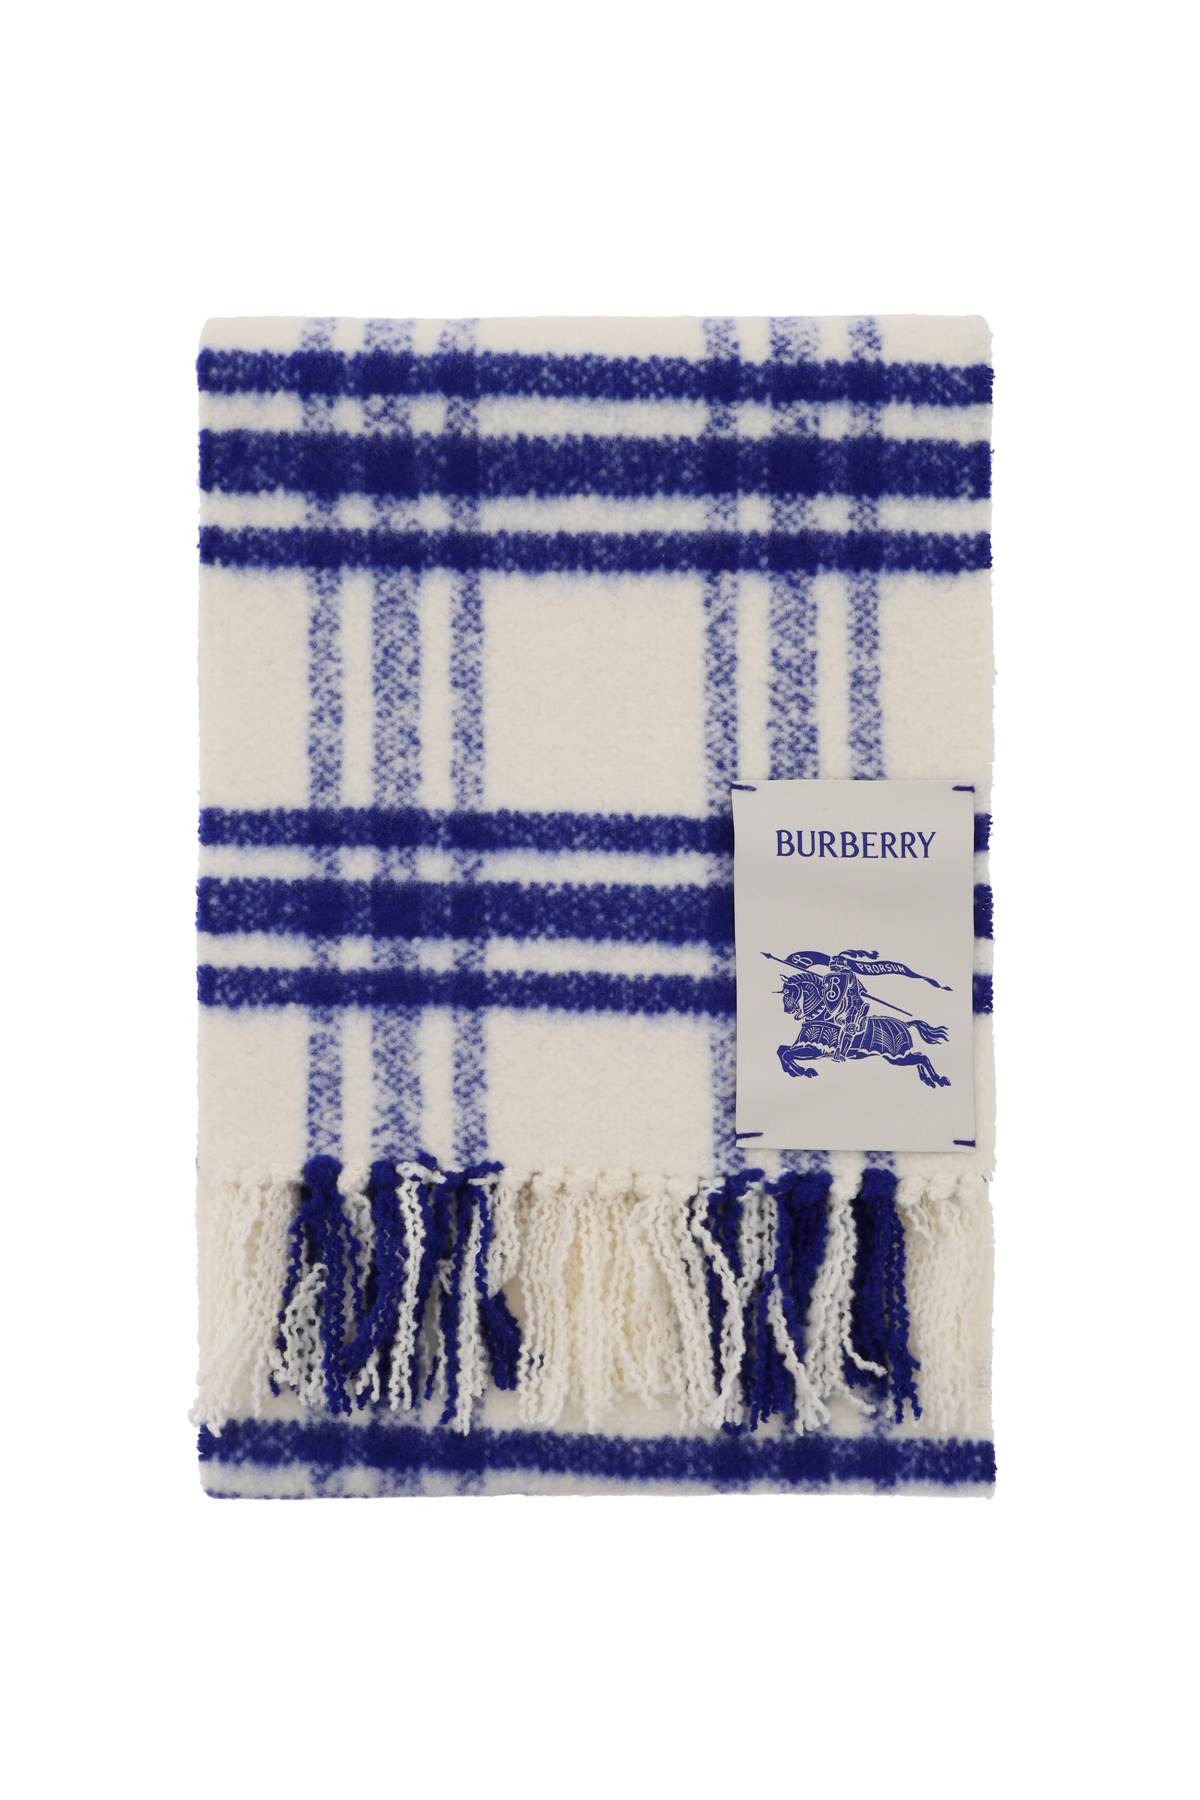 Burberry BURBERRY check wool scarf